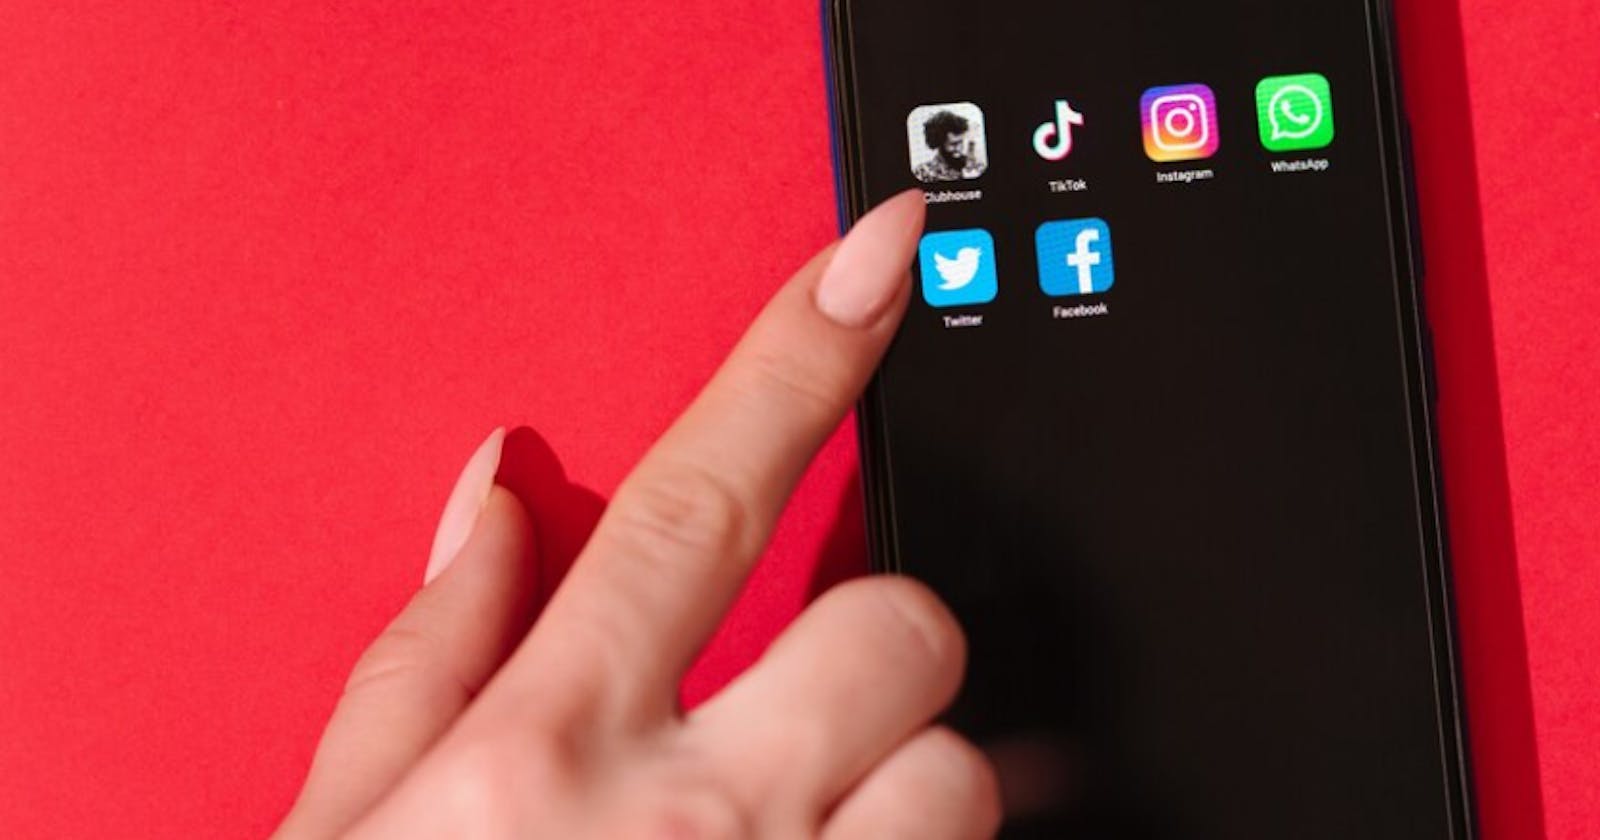 In an upcoming upgrade, Instagram and Facebook users will no longer be able to chat.